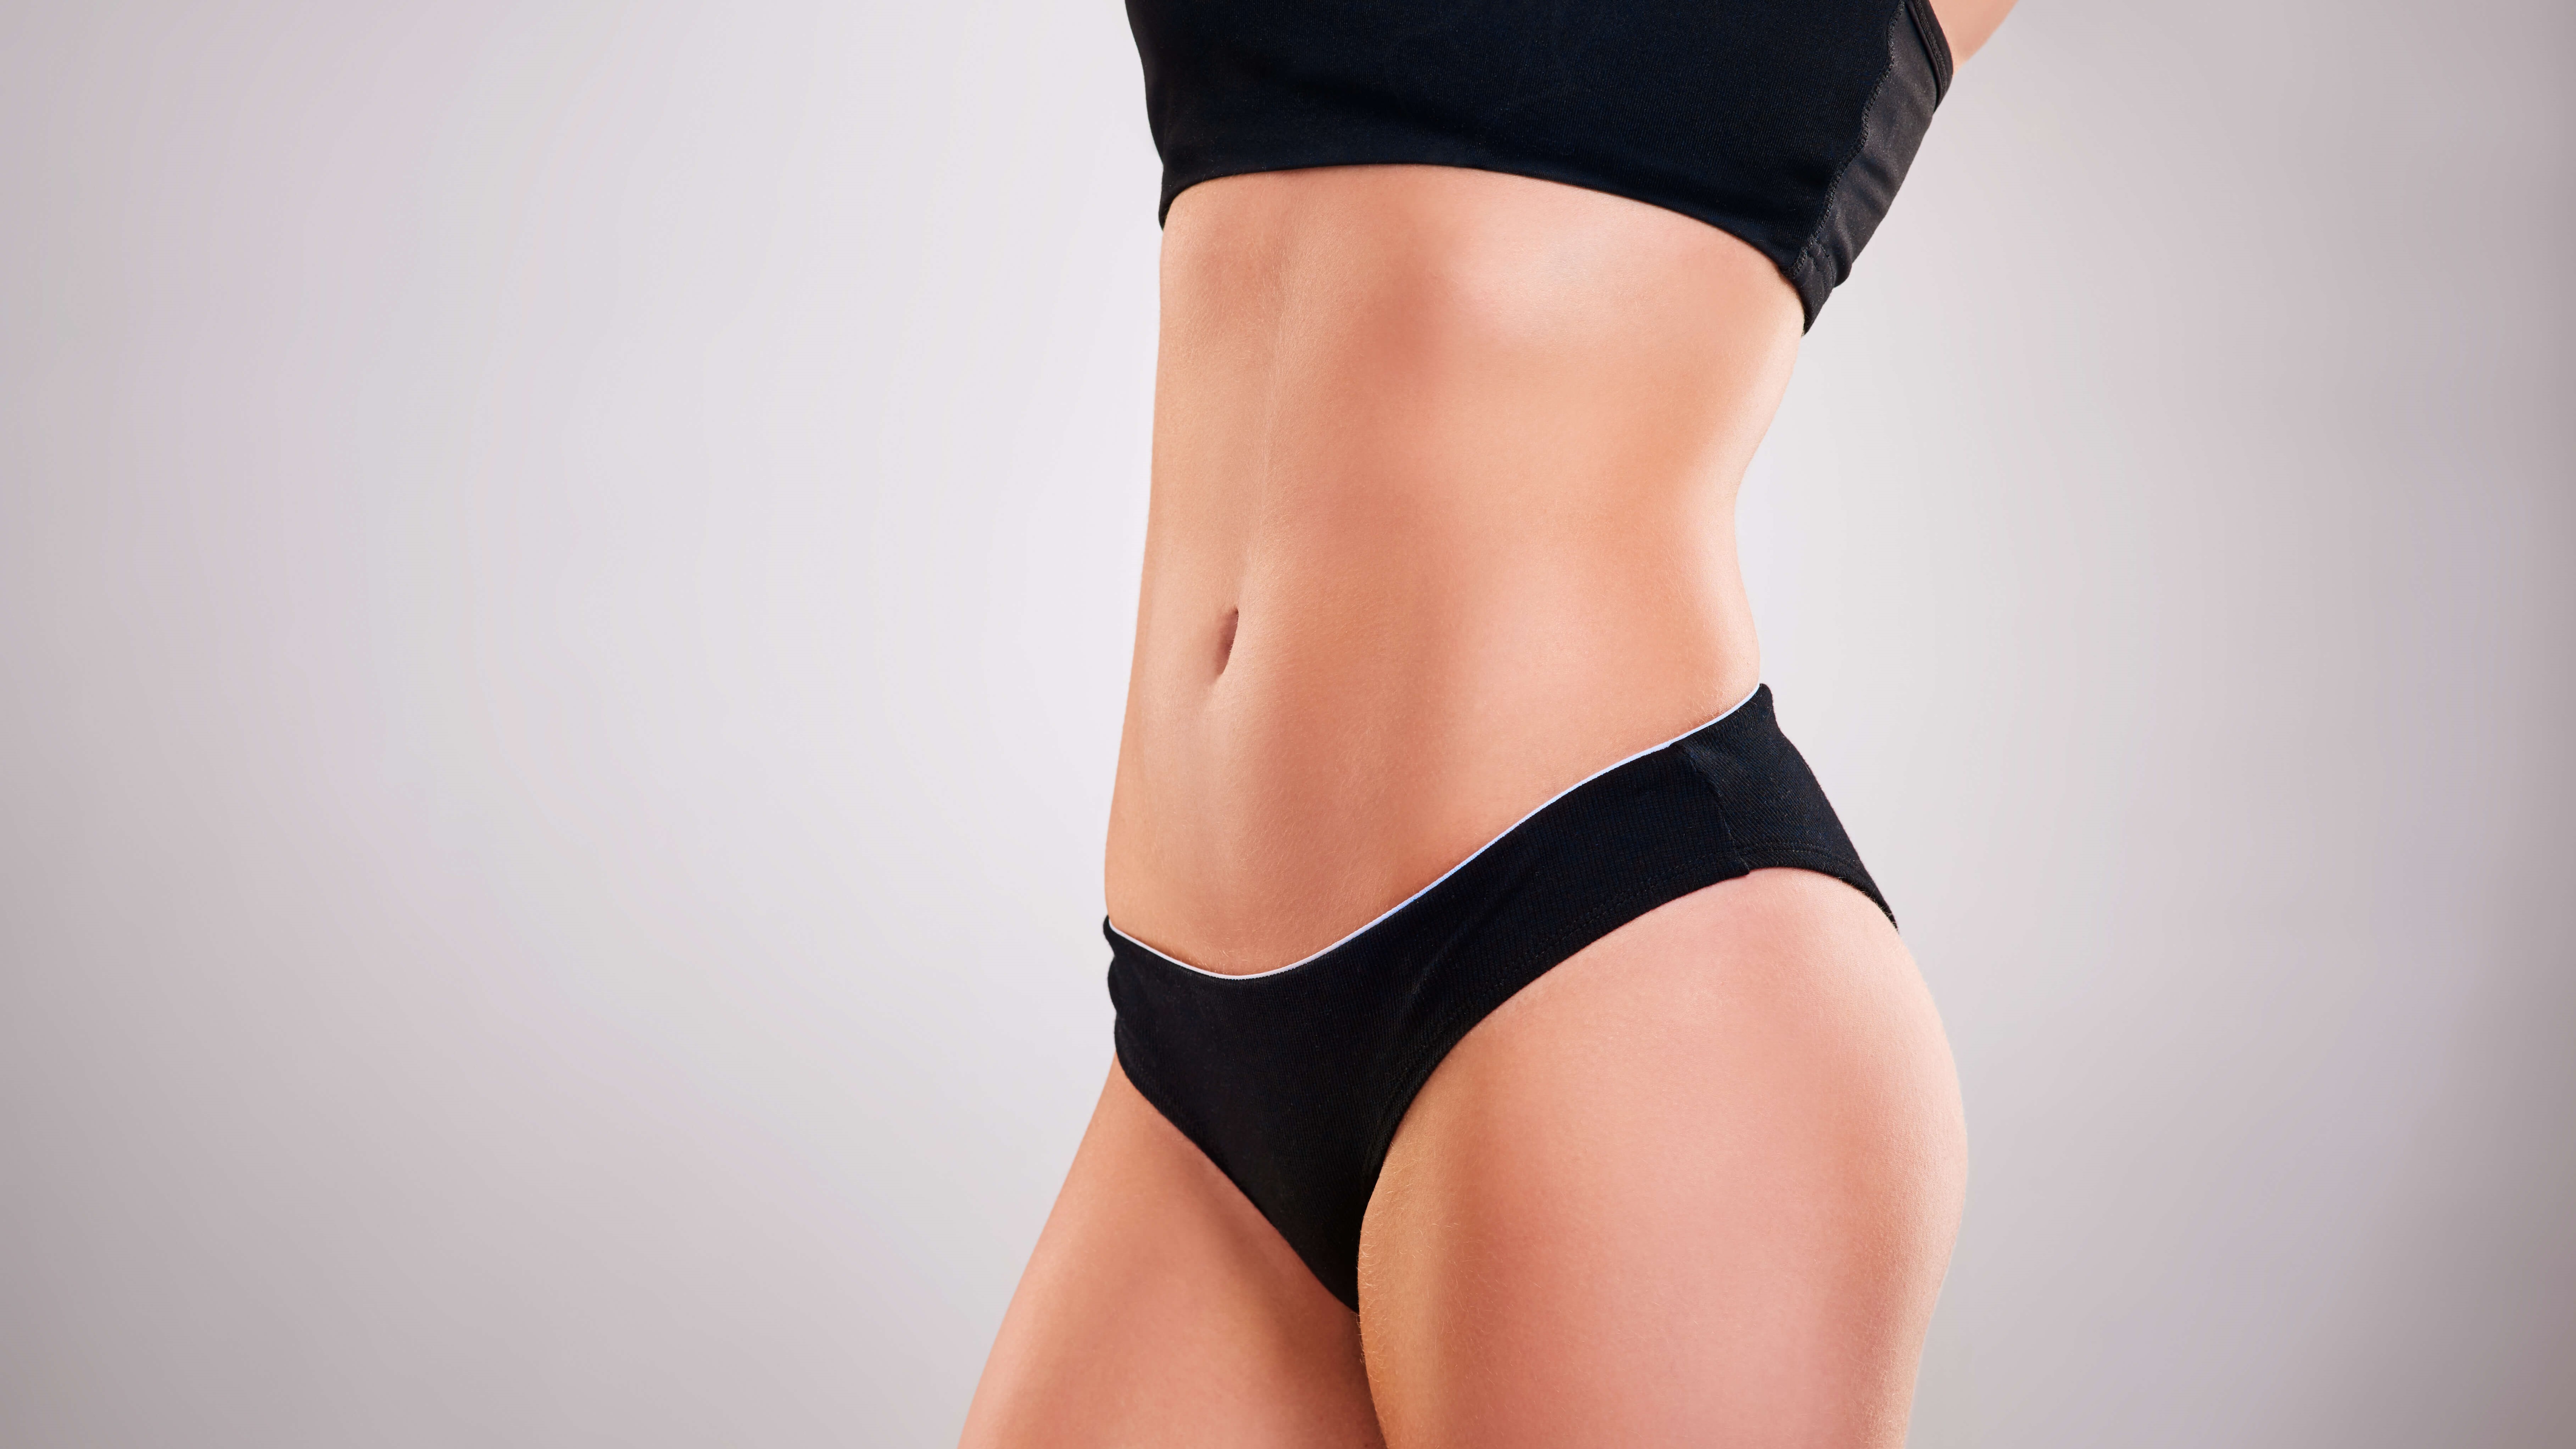 Tummy Tuck 20 Years Later: What to Expect and Consider